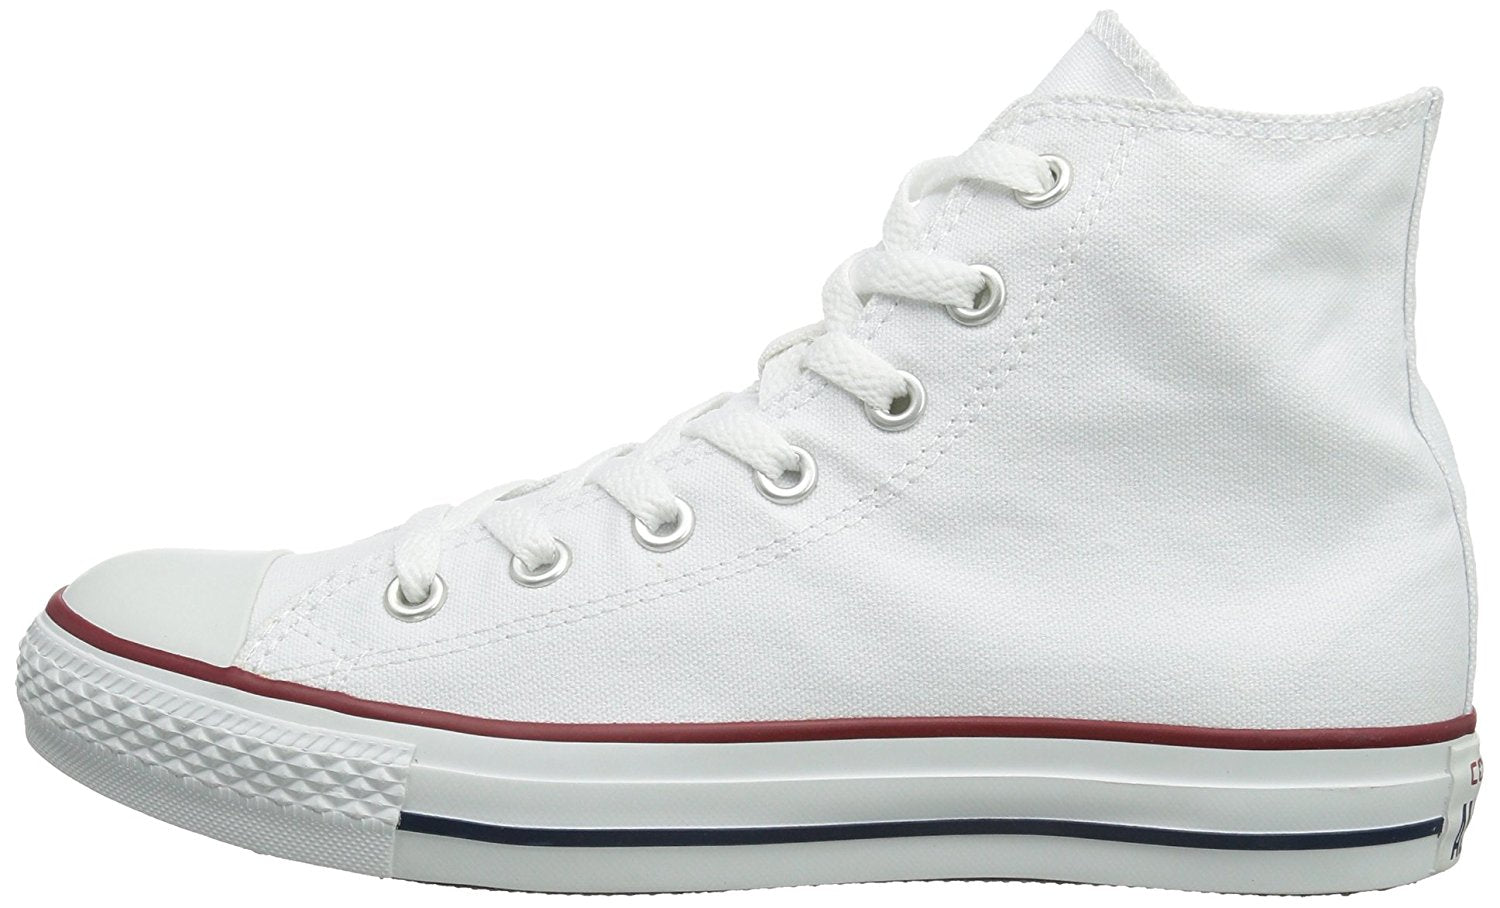 Converse Unisex Chuck Taylor All Star High Top Sneakers